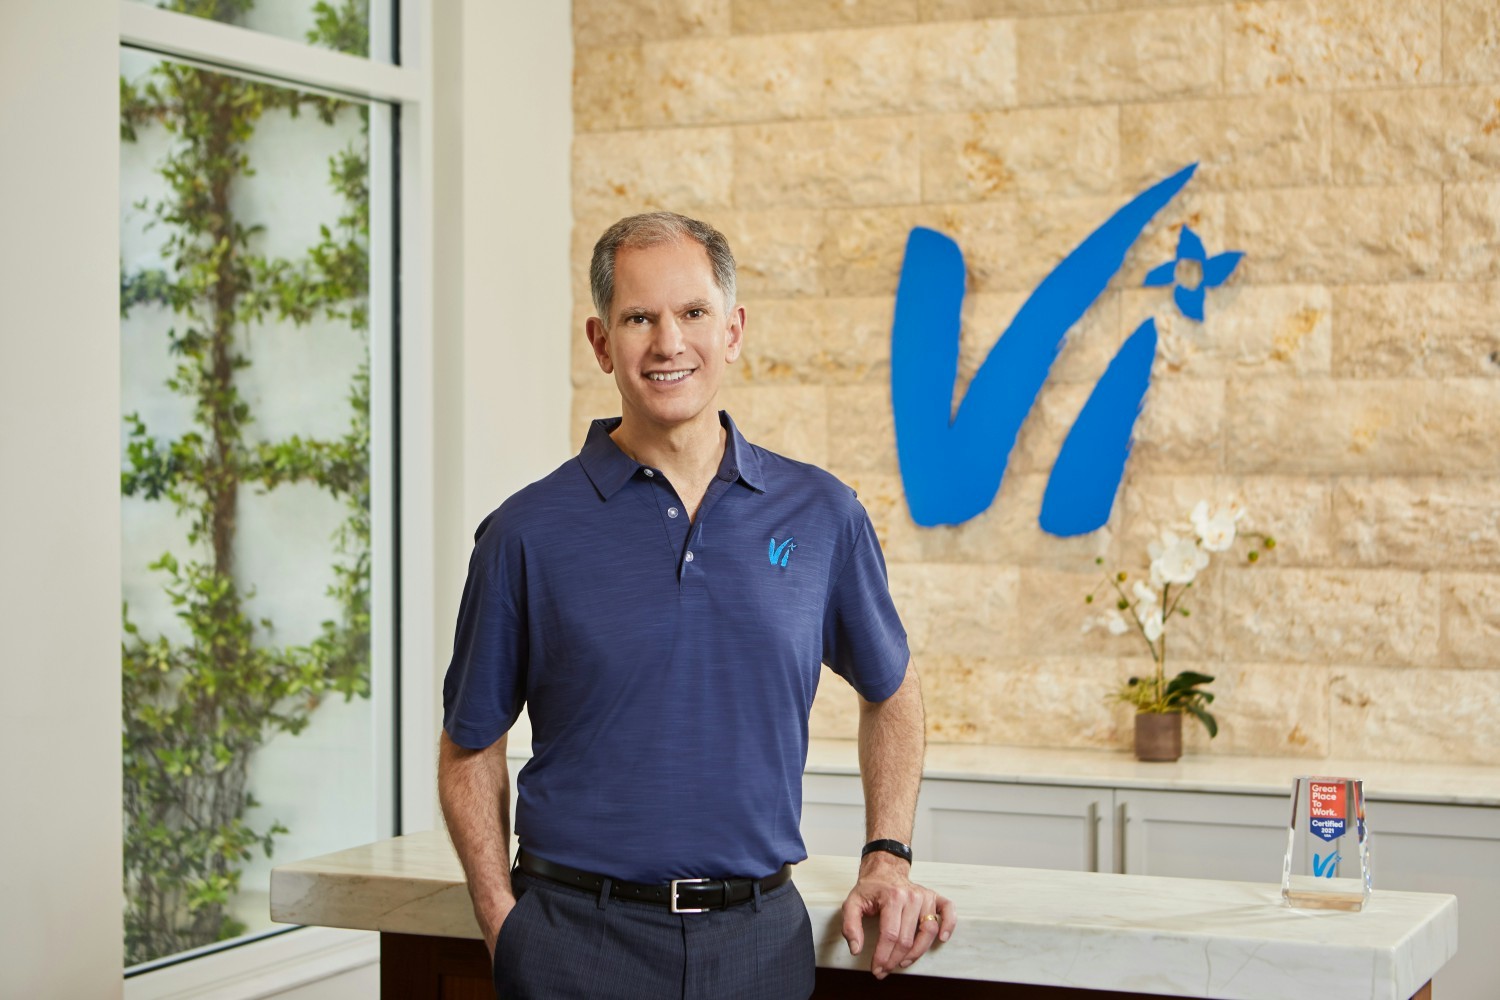 Vi's president Gary Smith leads a team of nearly 3,000 people dedicated to meeting the needs of our community residents.